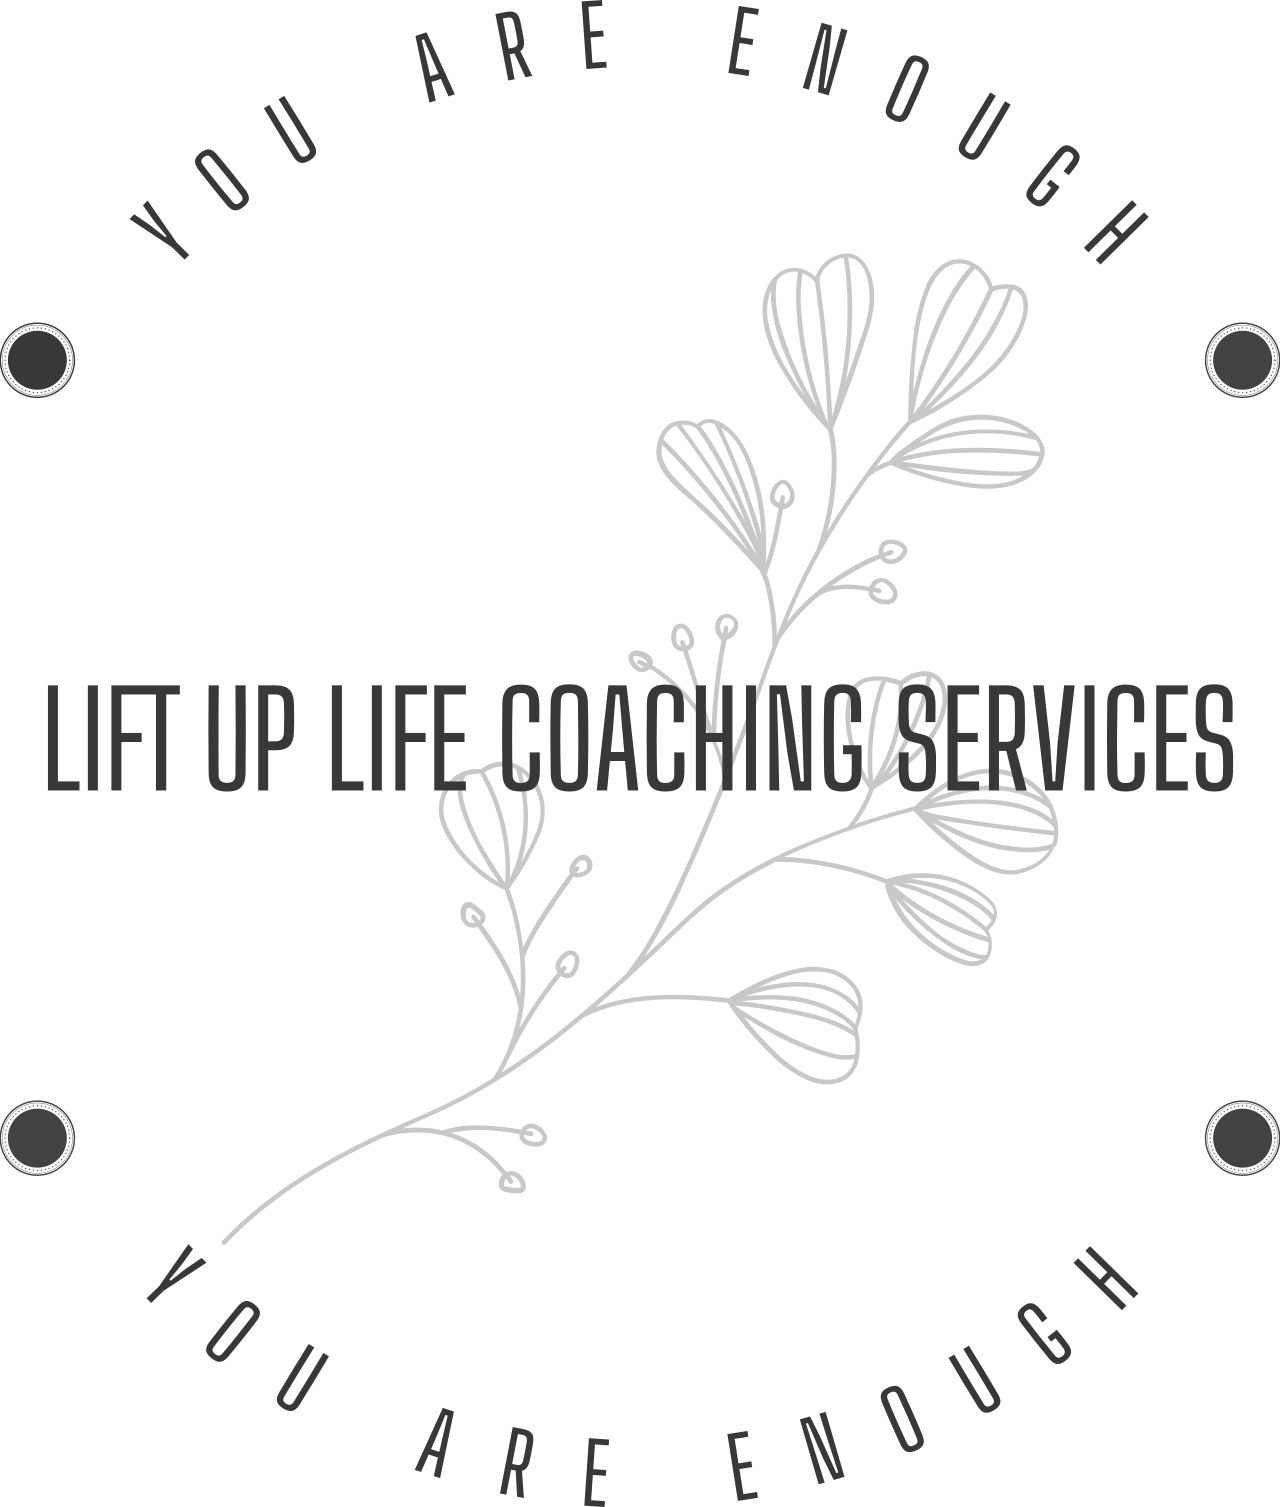 Lift Up Life Coaching services's logo